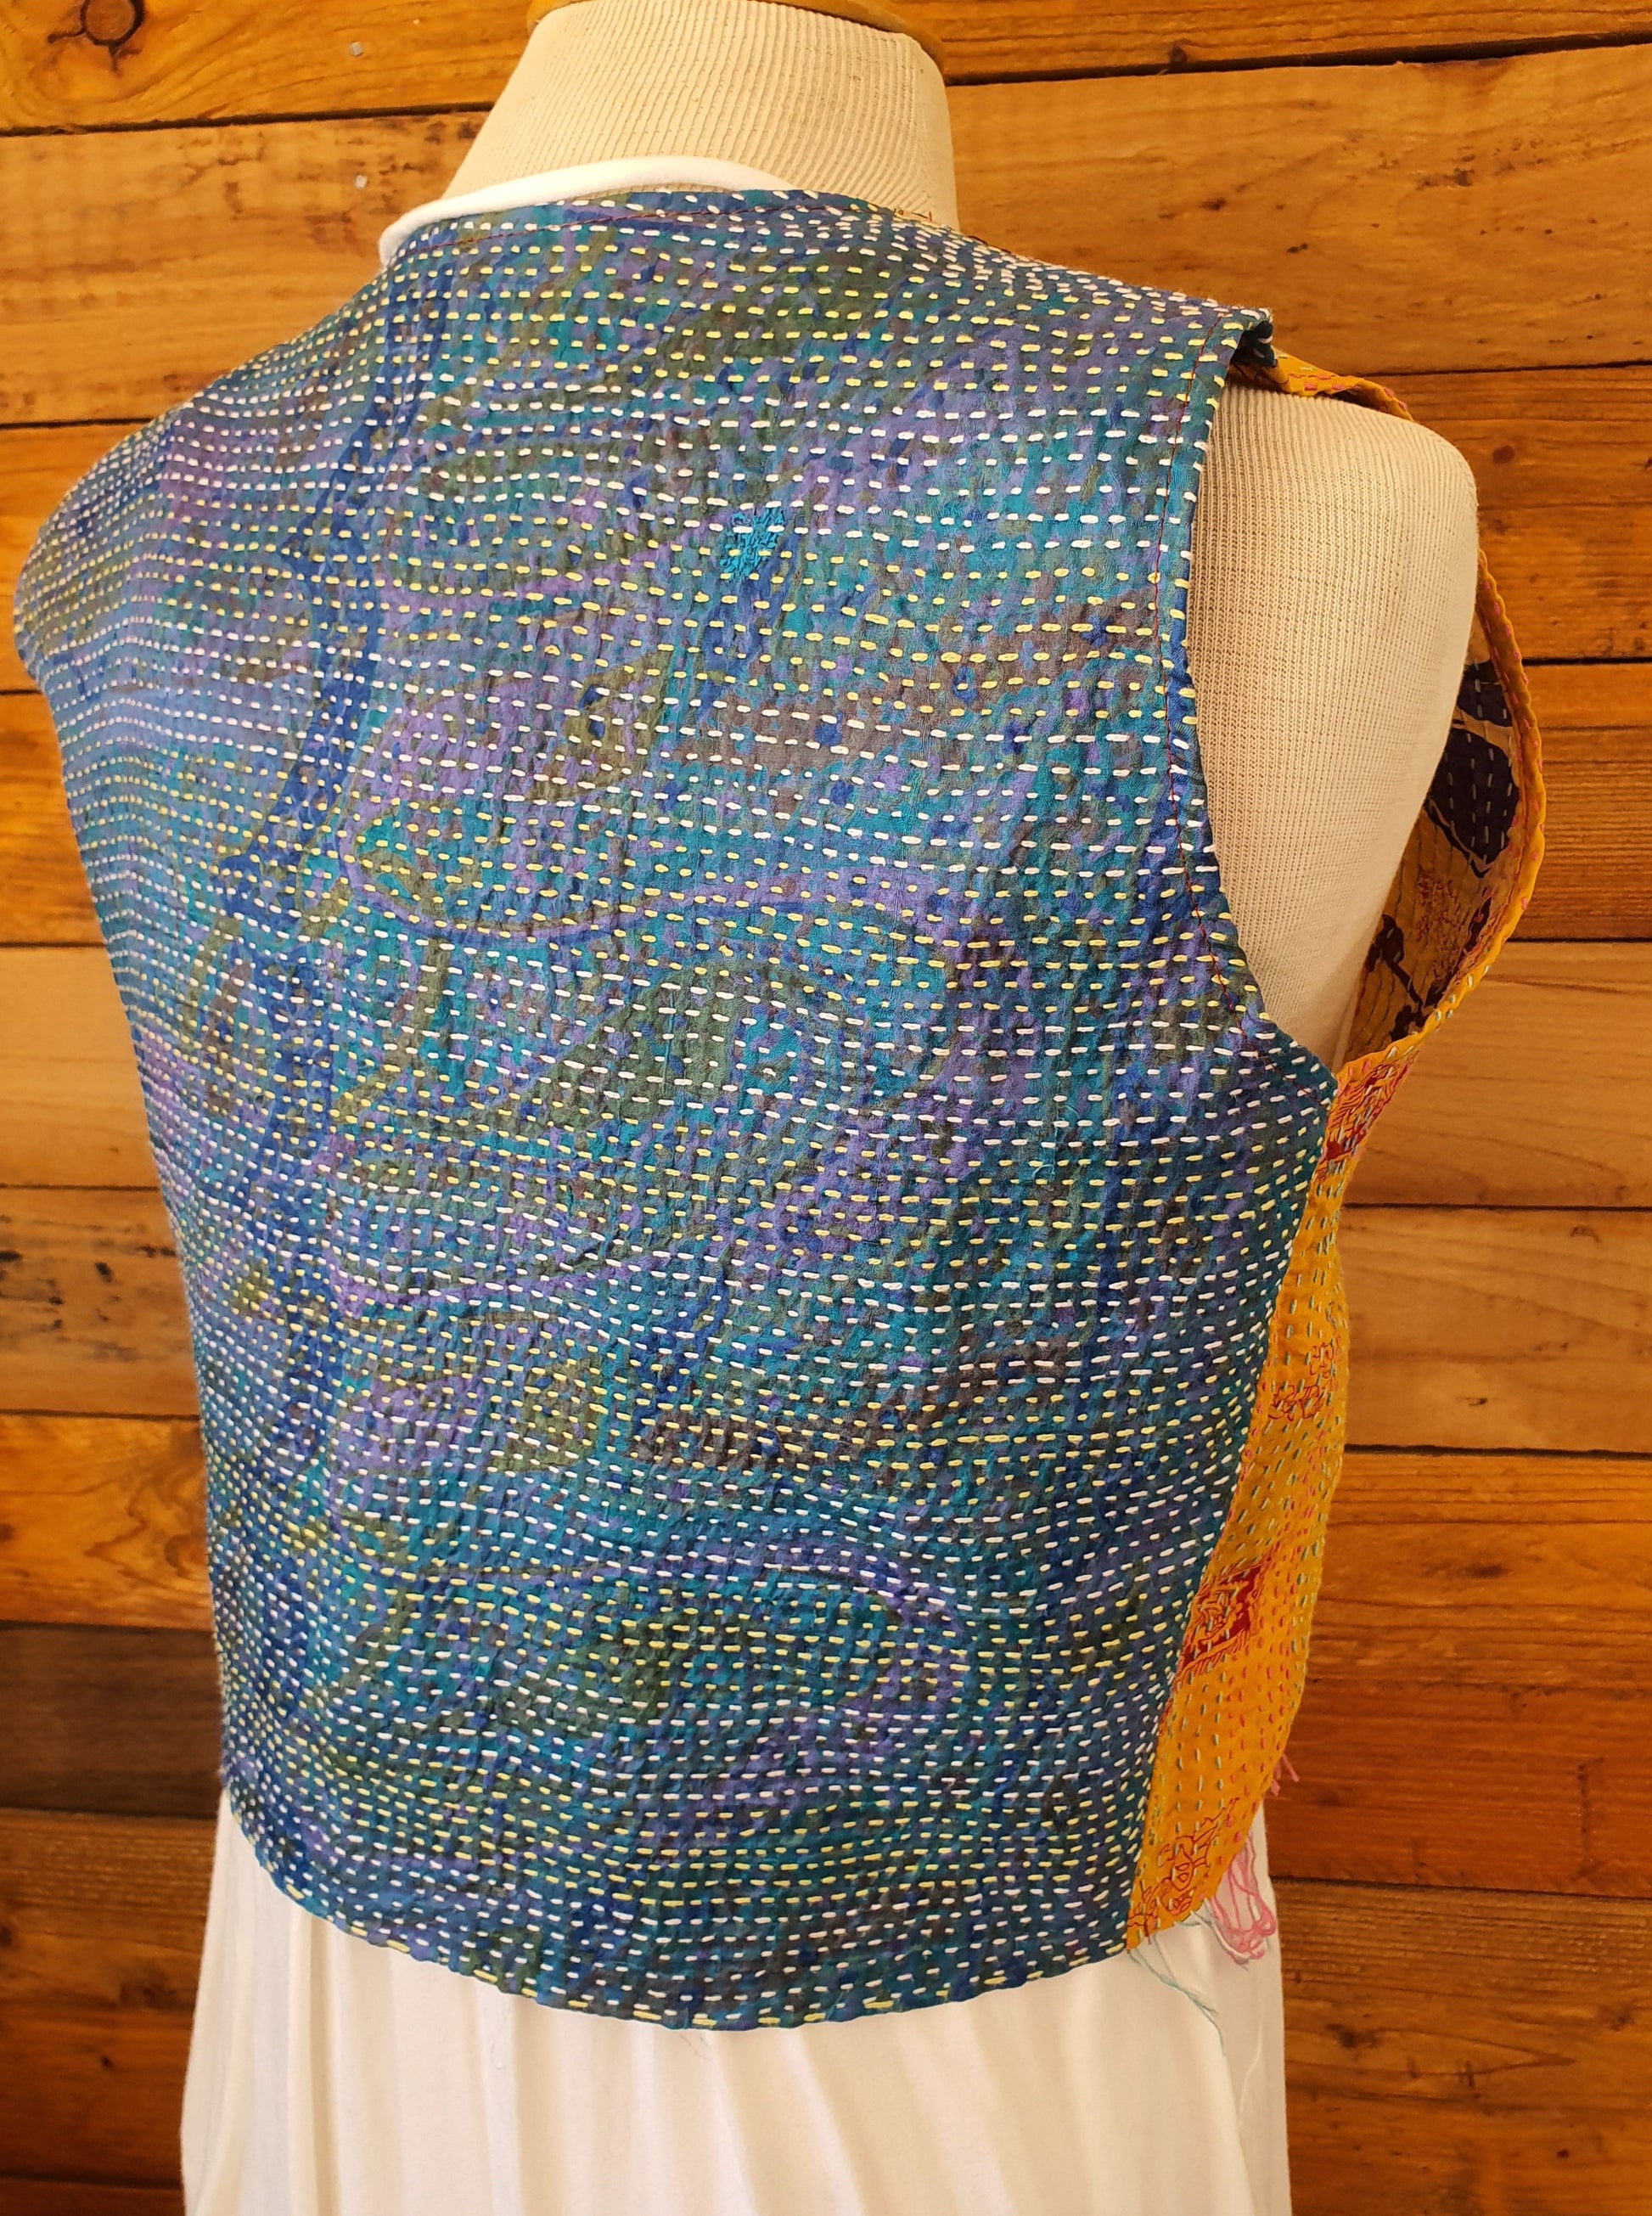 Back view of reverse side of vest blue with hand stich